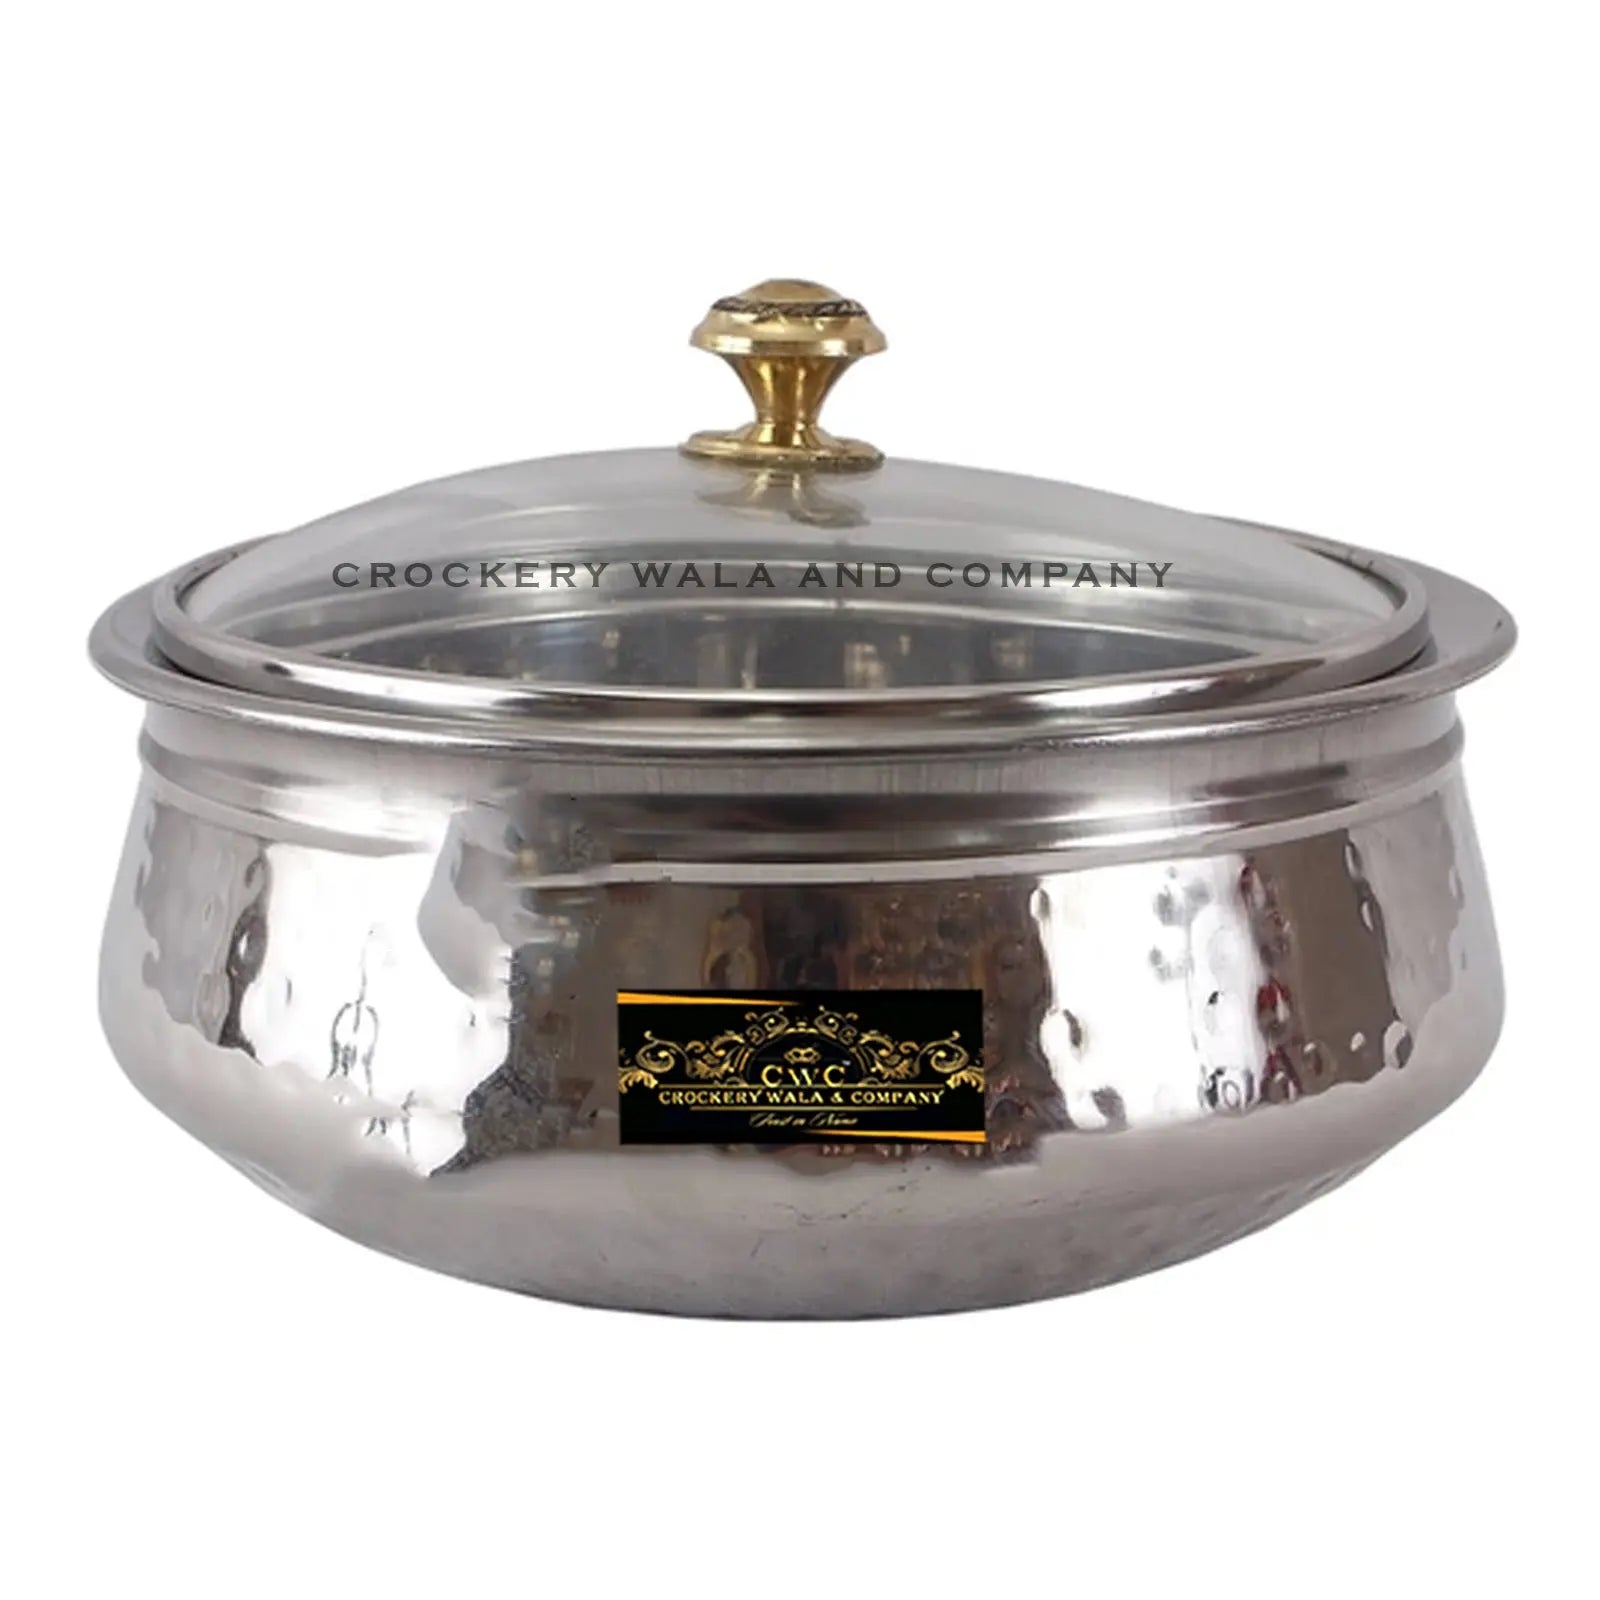 Crockery Wala And Company Steel Handi Stainless Steel Hammered Handi With Glass Lid Serving Bowl Handi 1250 ML - CROCKERY WALA AND COMPANY 